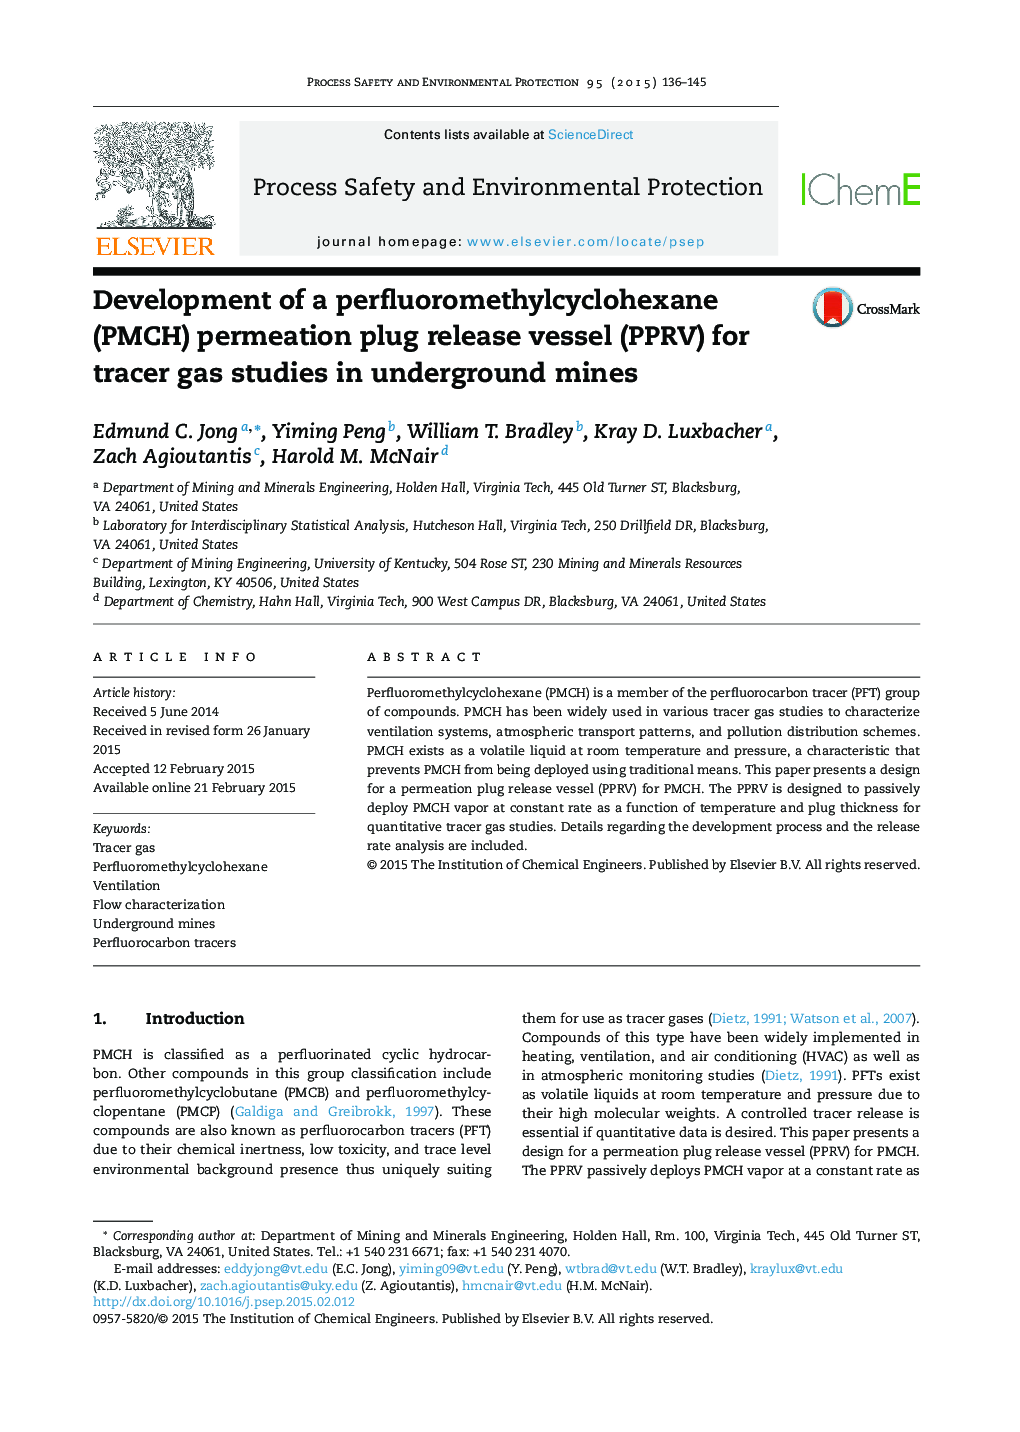 Development of a perfluoromethylcyclohexane (PMCH) permeation plug release vessel (PPRV) for tracer gas studies in underground mines